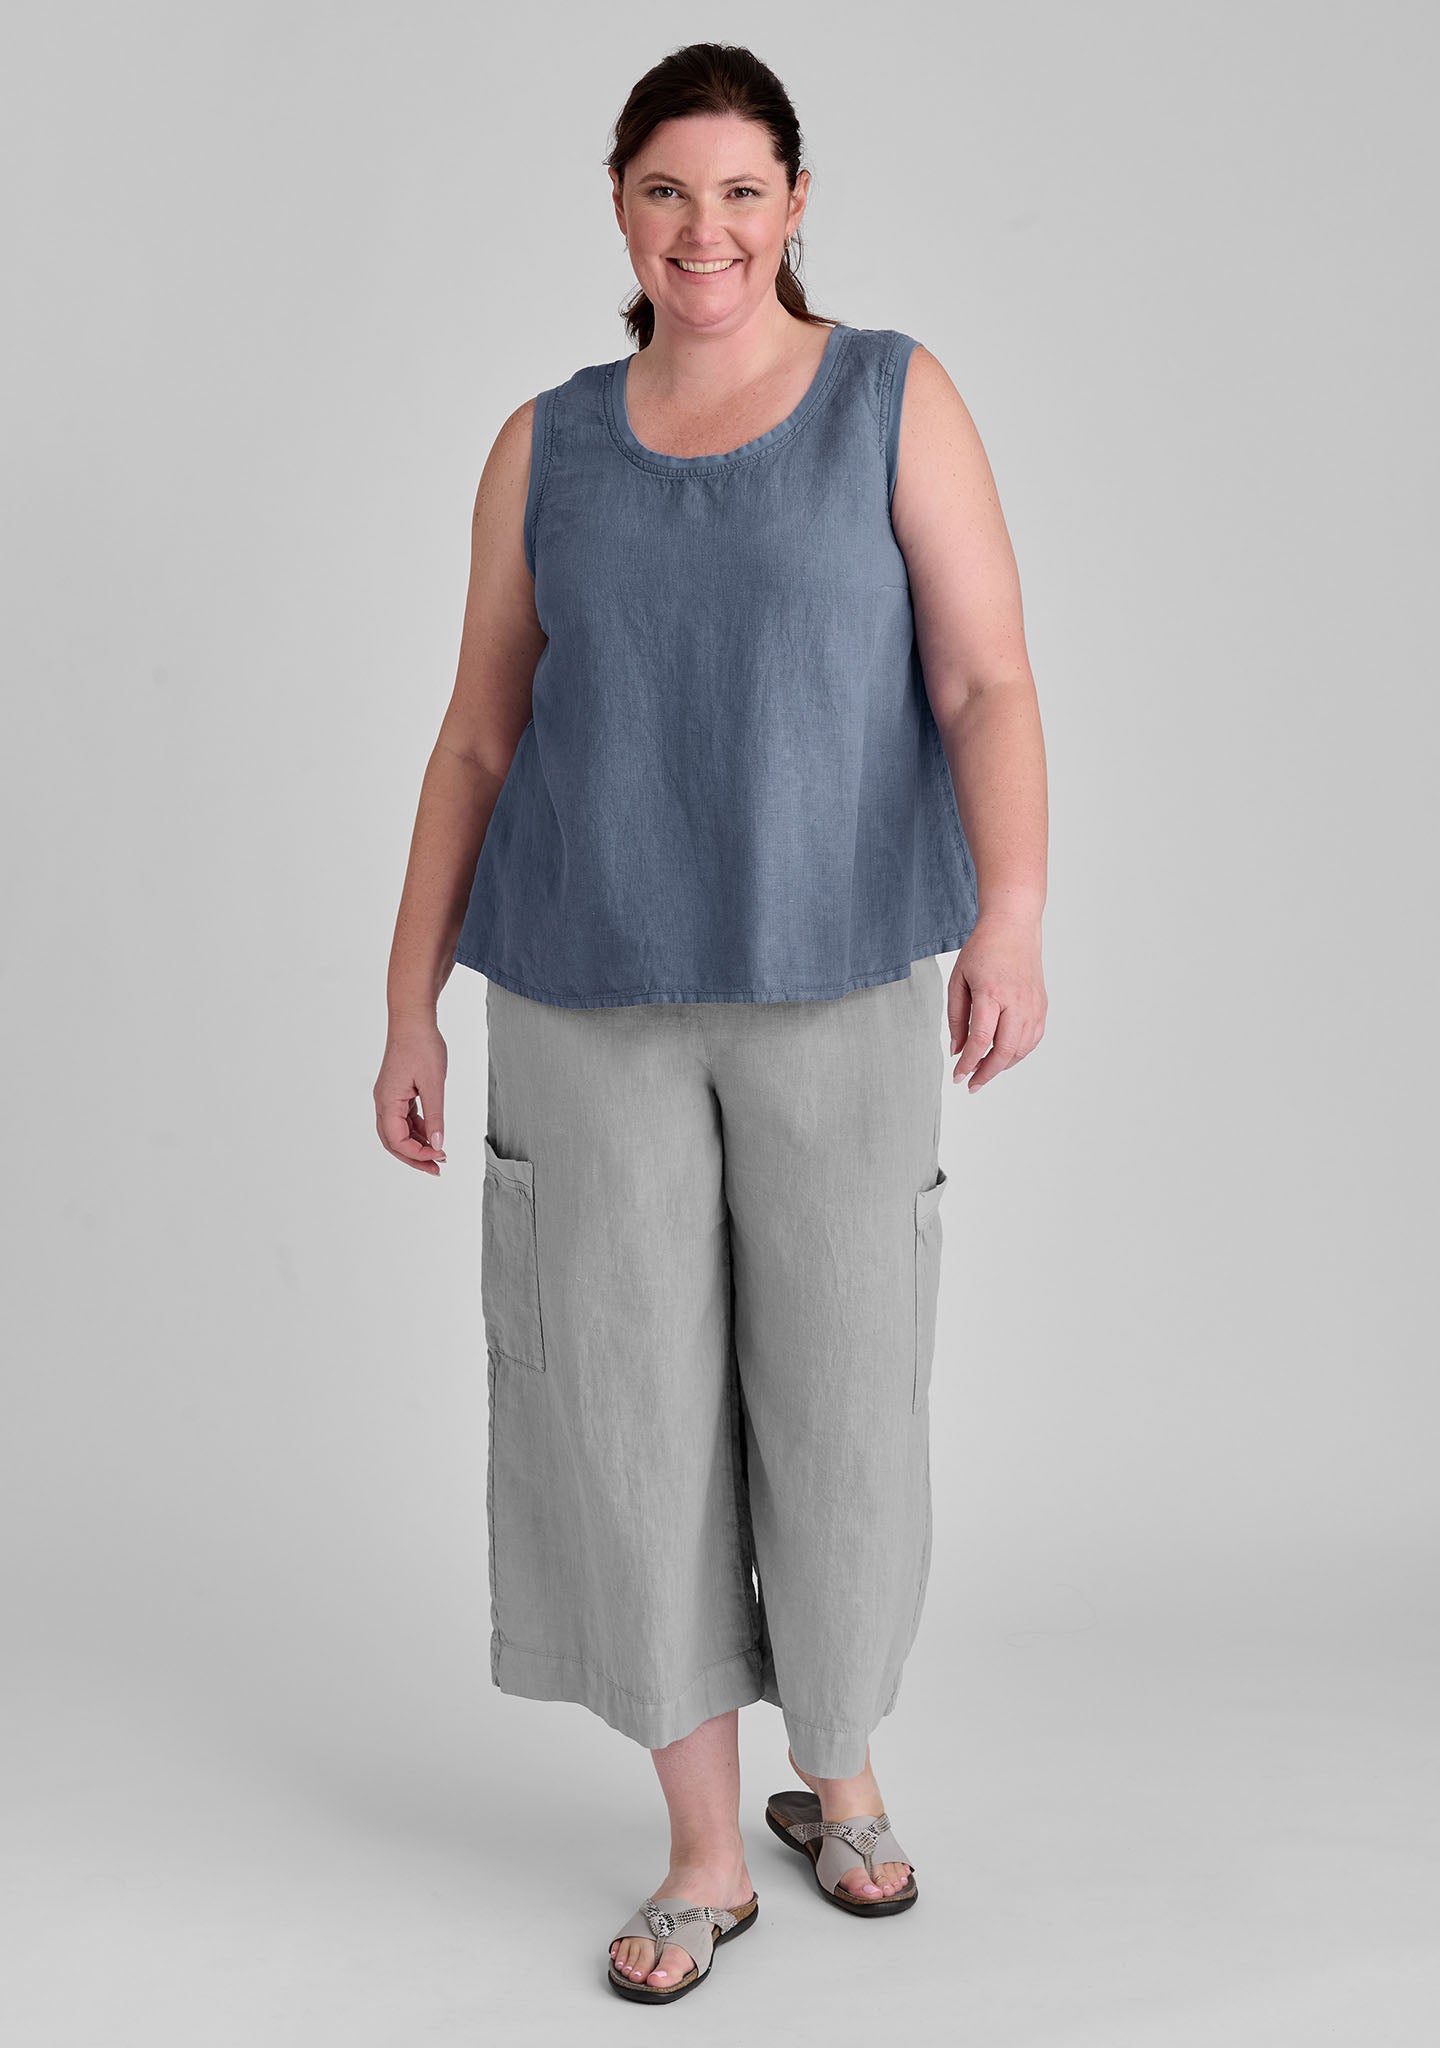 FLAX linen tank in blue with linen pants in grey